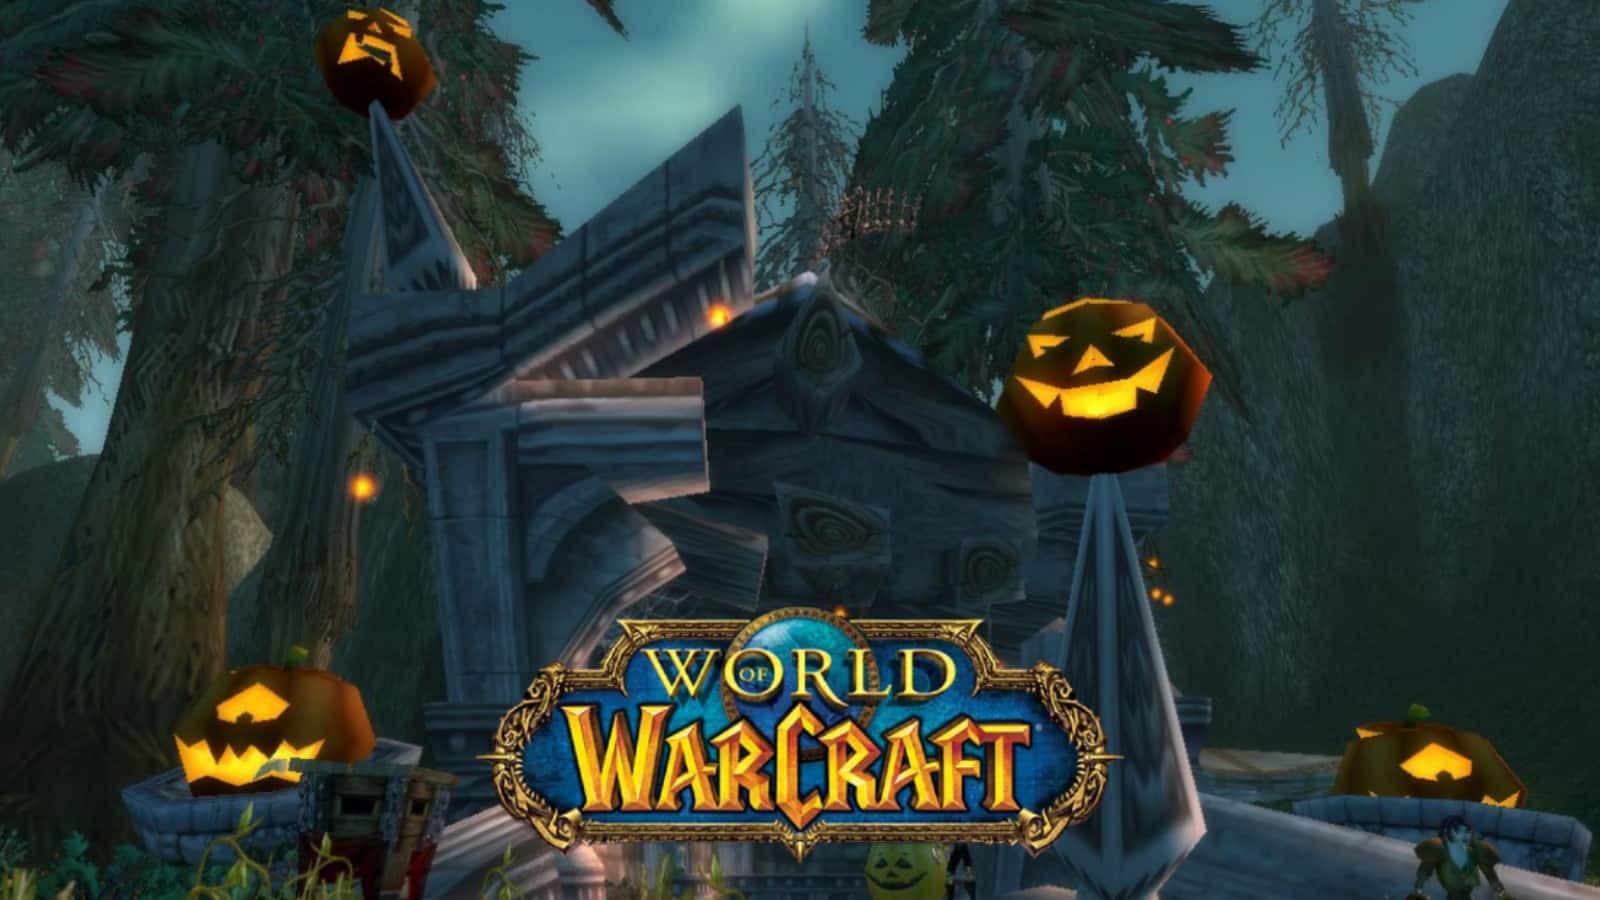 ROBLOX Announces Halloween Event With New Content